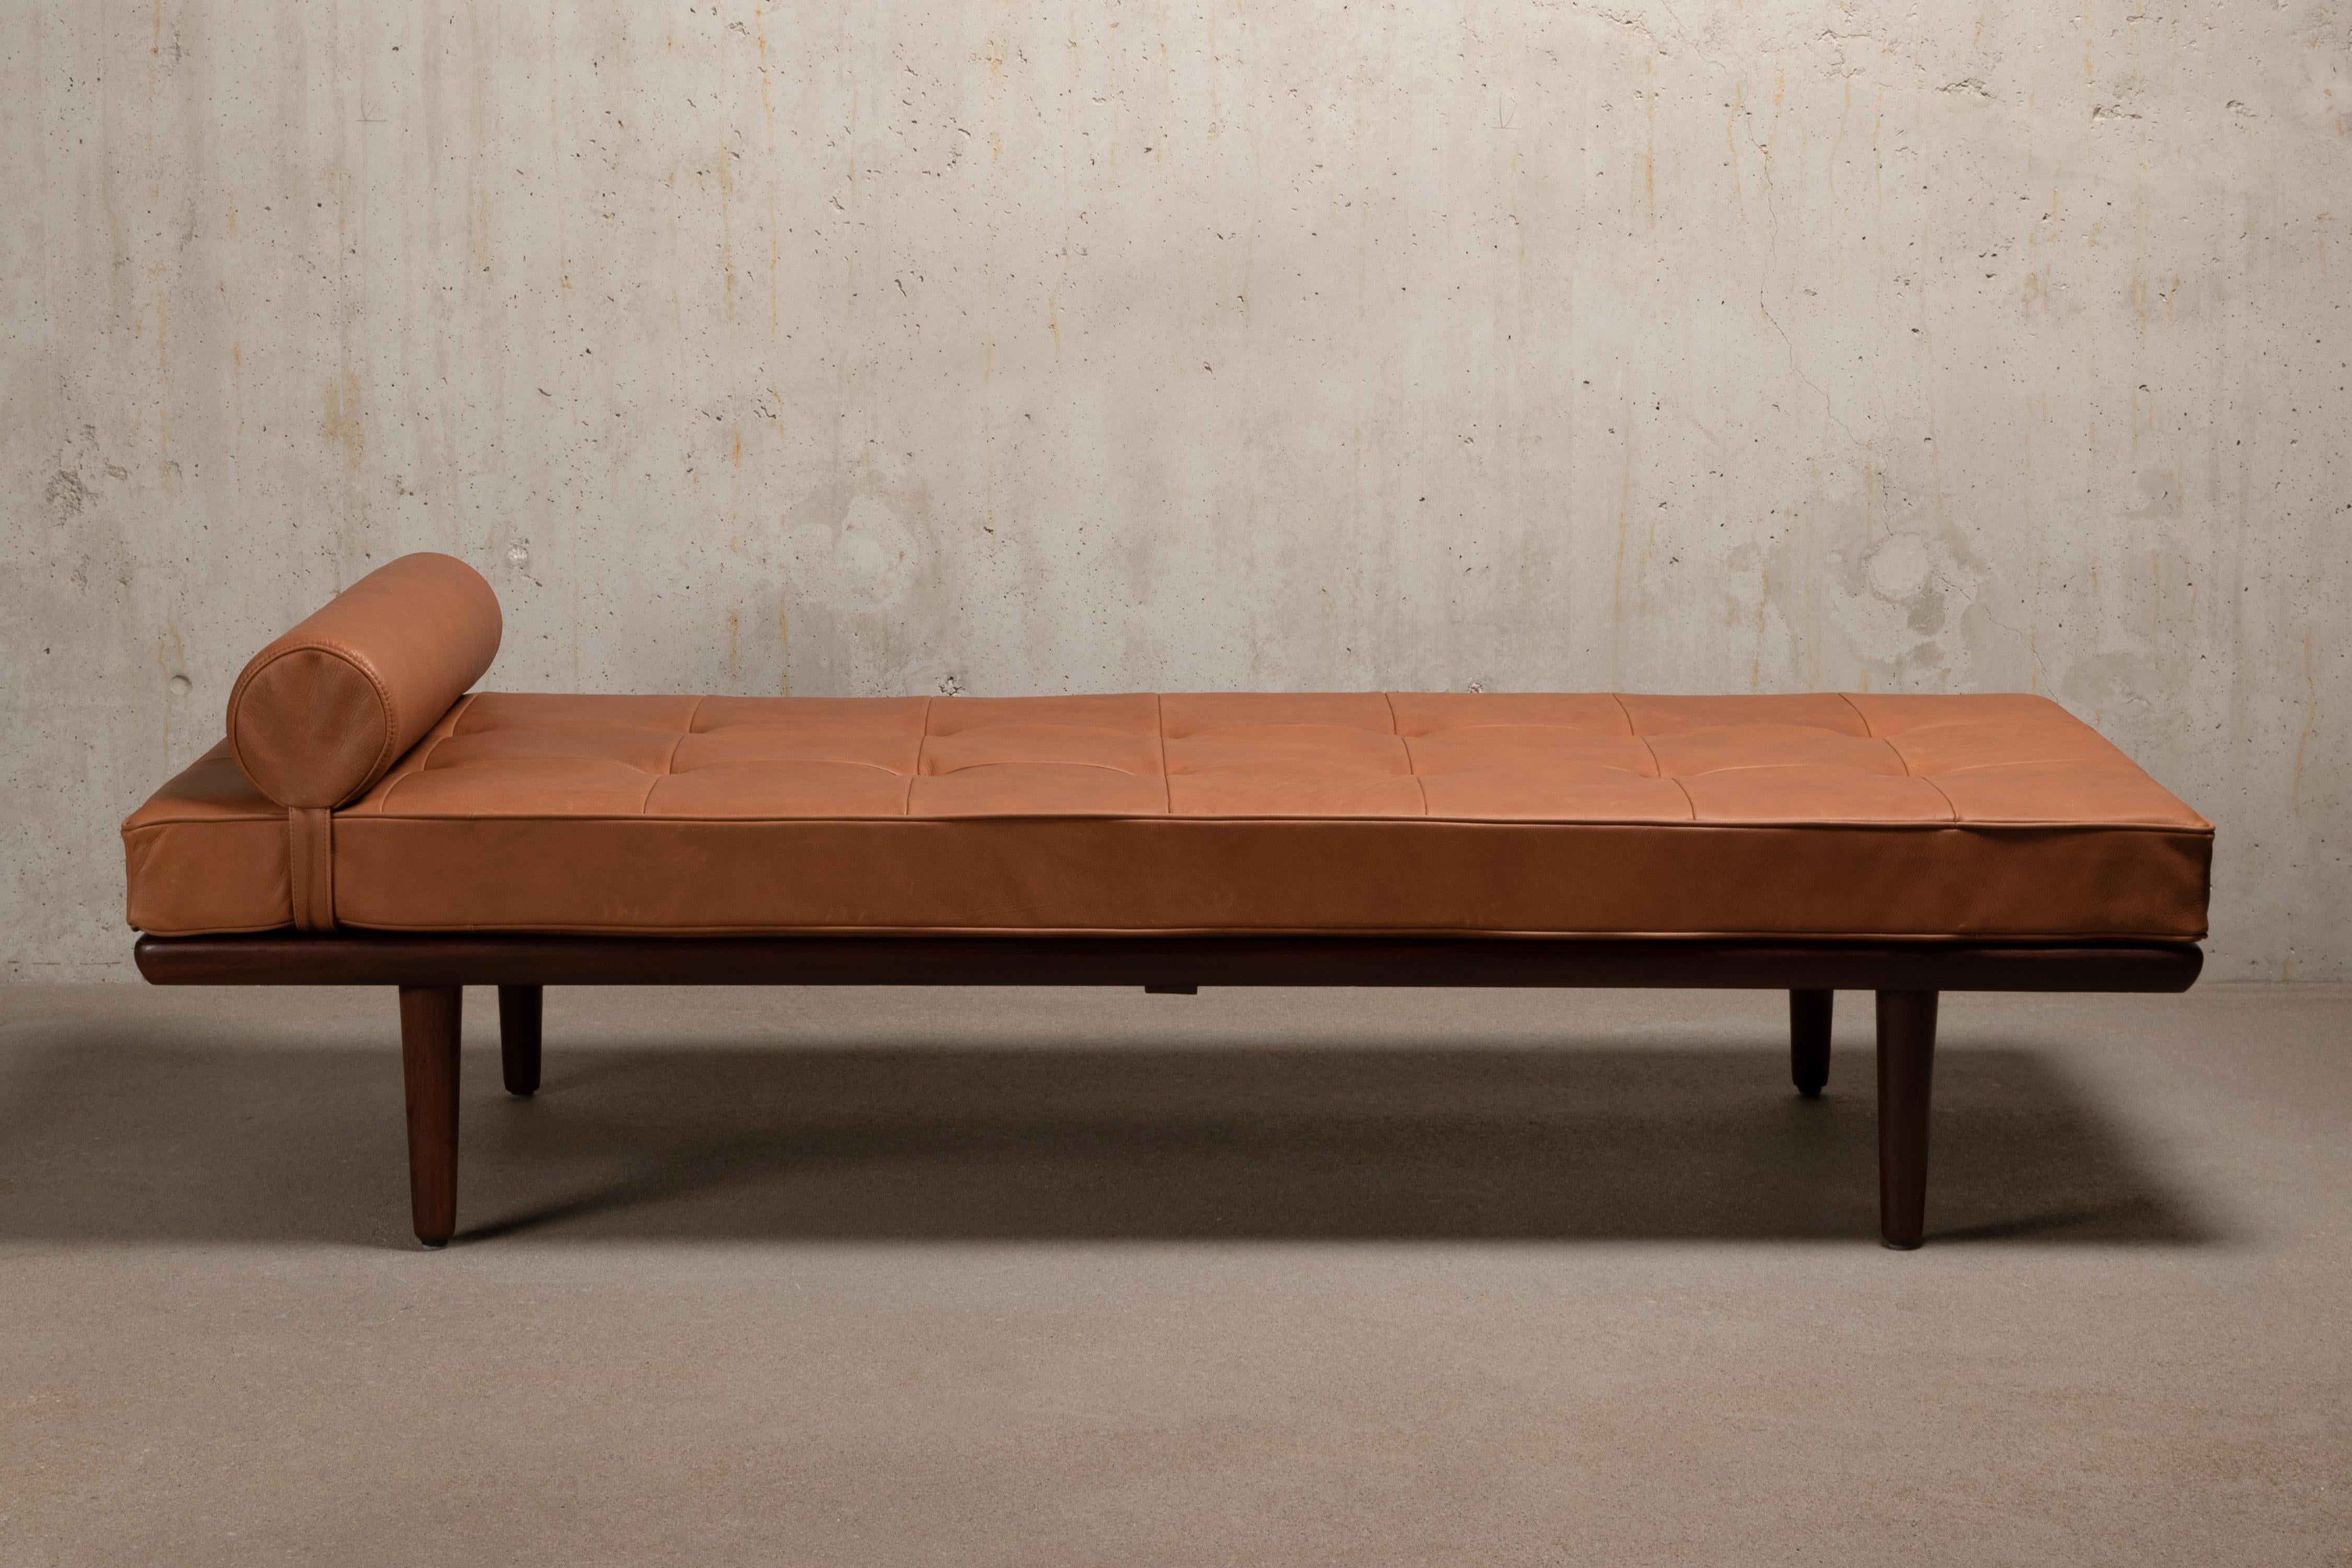 Great daybed Model GE19, designed by Hans Hans J. Wegner for GETAMA Denmark in 1956. Teak frame and tapered legs in good condition with minor traces of use. New mattress and neck roll pillow upholstered in beautiful high quality soft Cognac